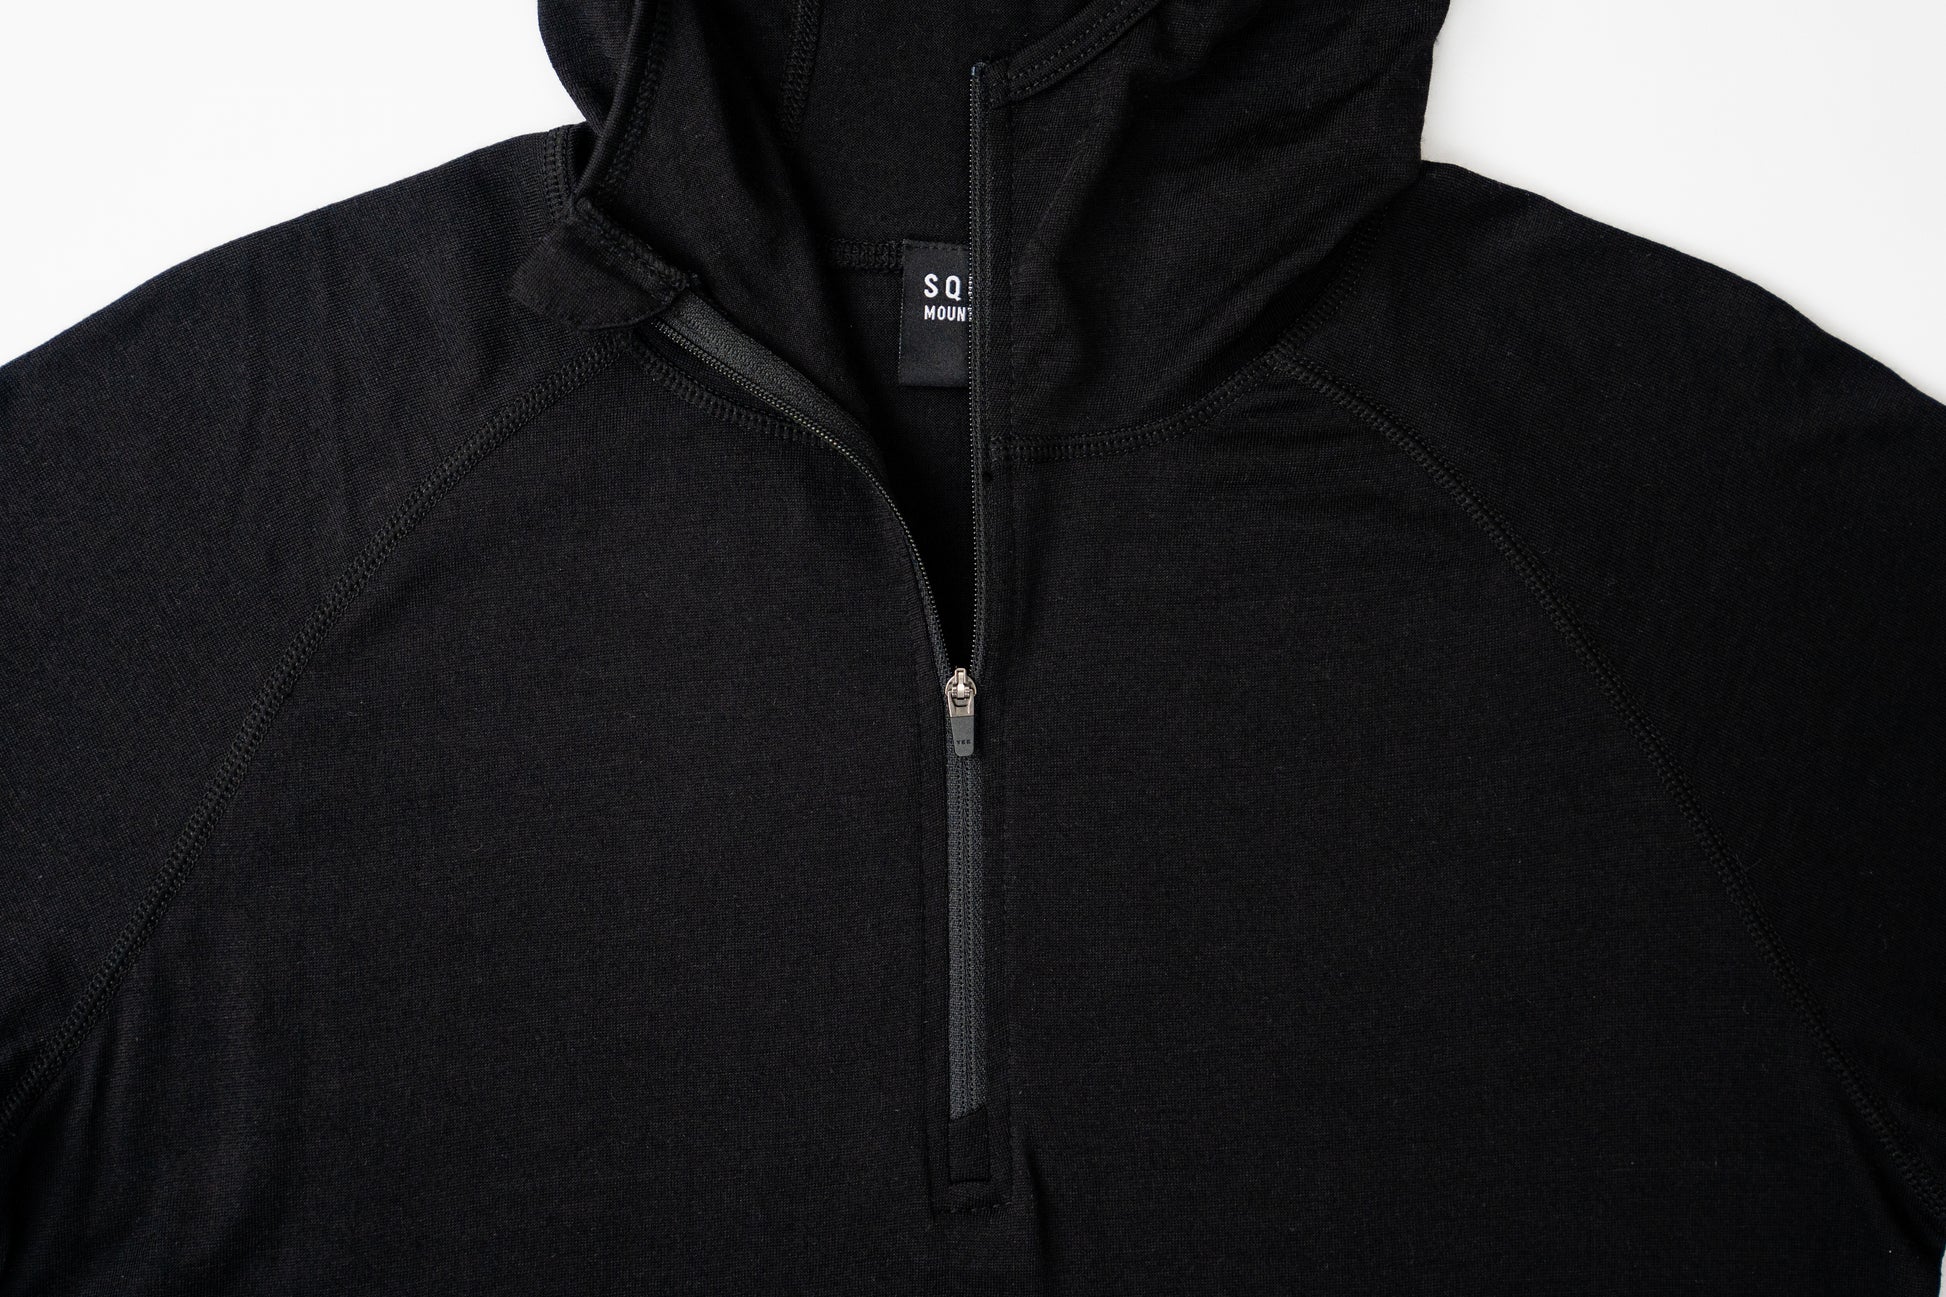 Top half of womens black wool base layer hoodie from Squak Mountain Co.